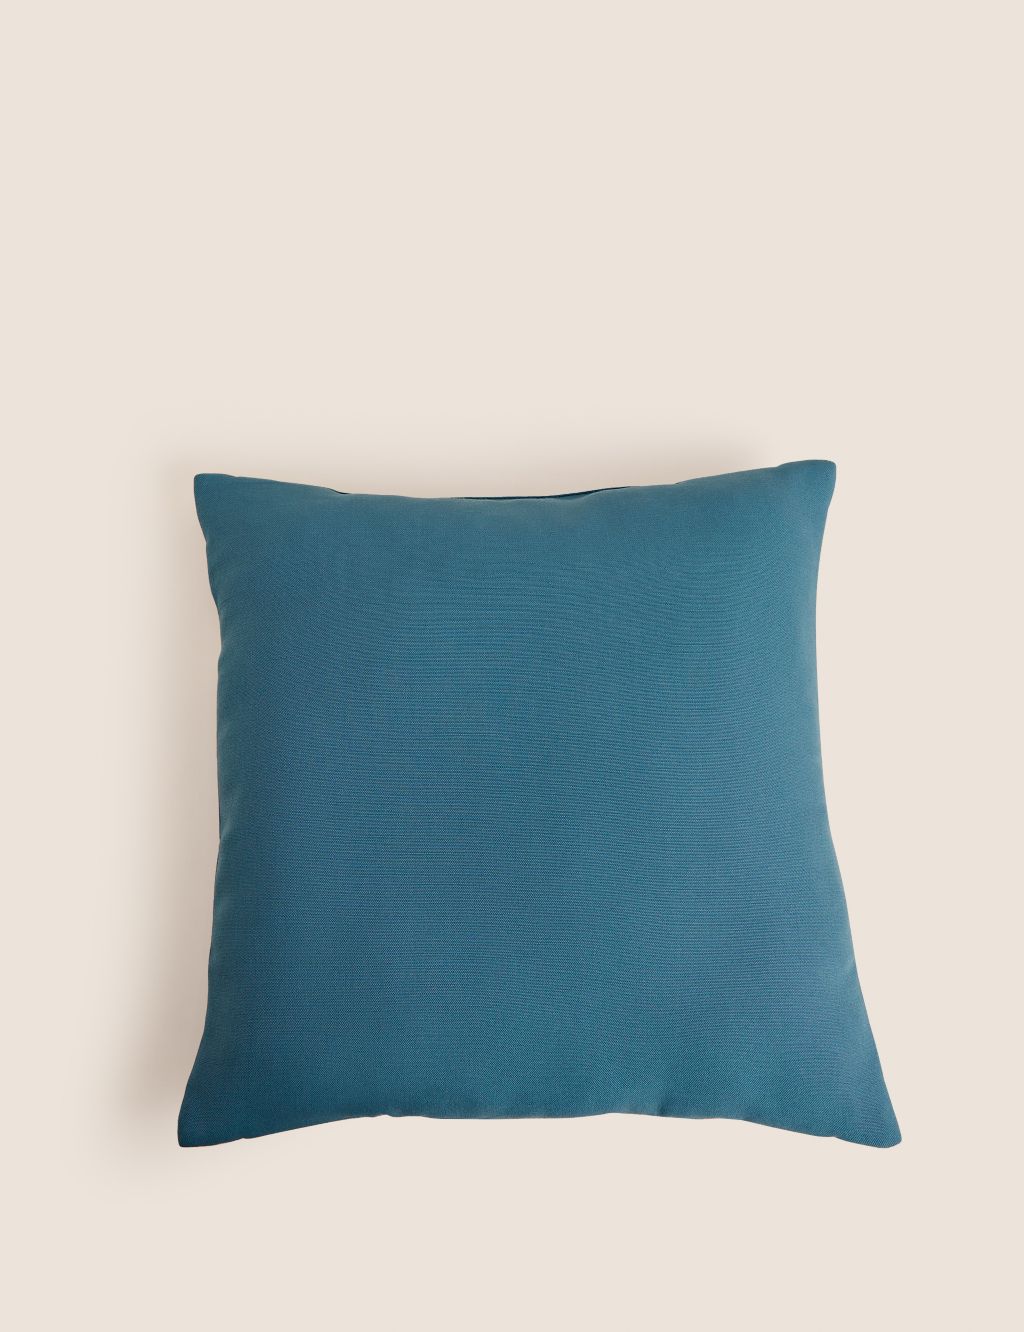 Set of 2 Outdoor Cushions image 1